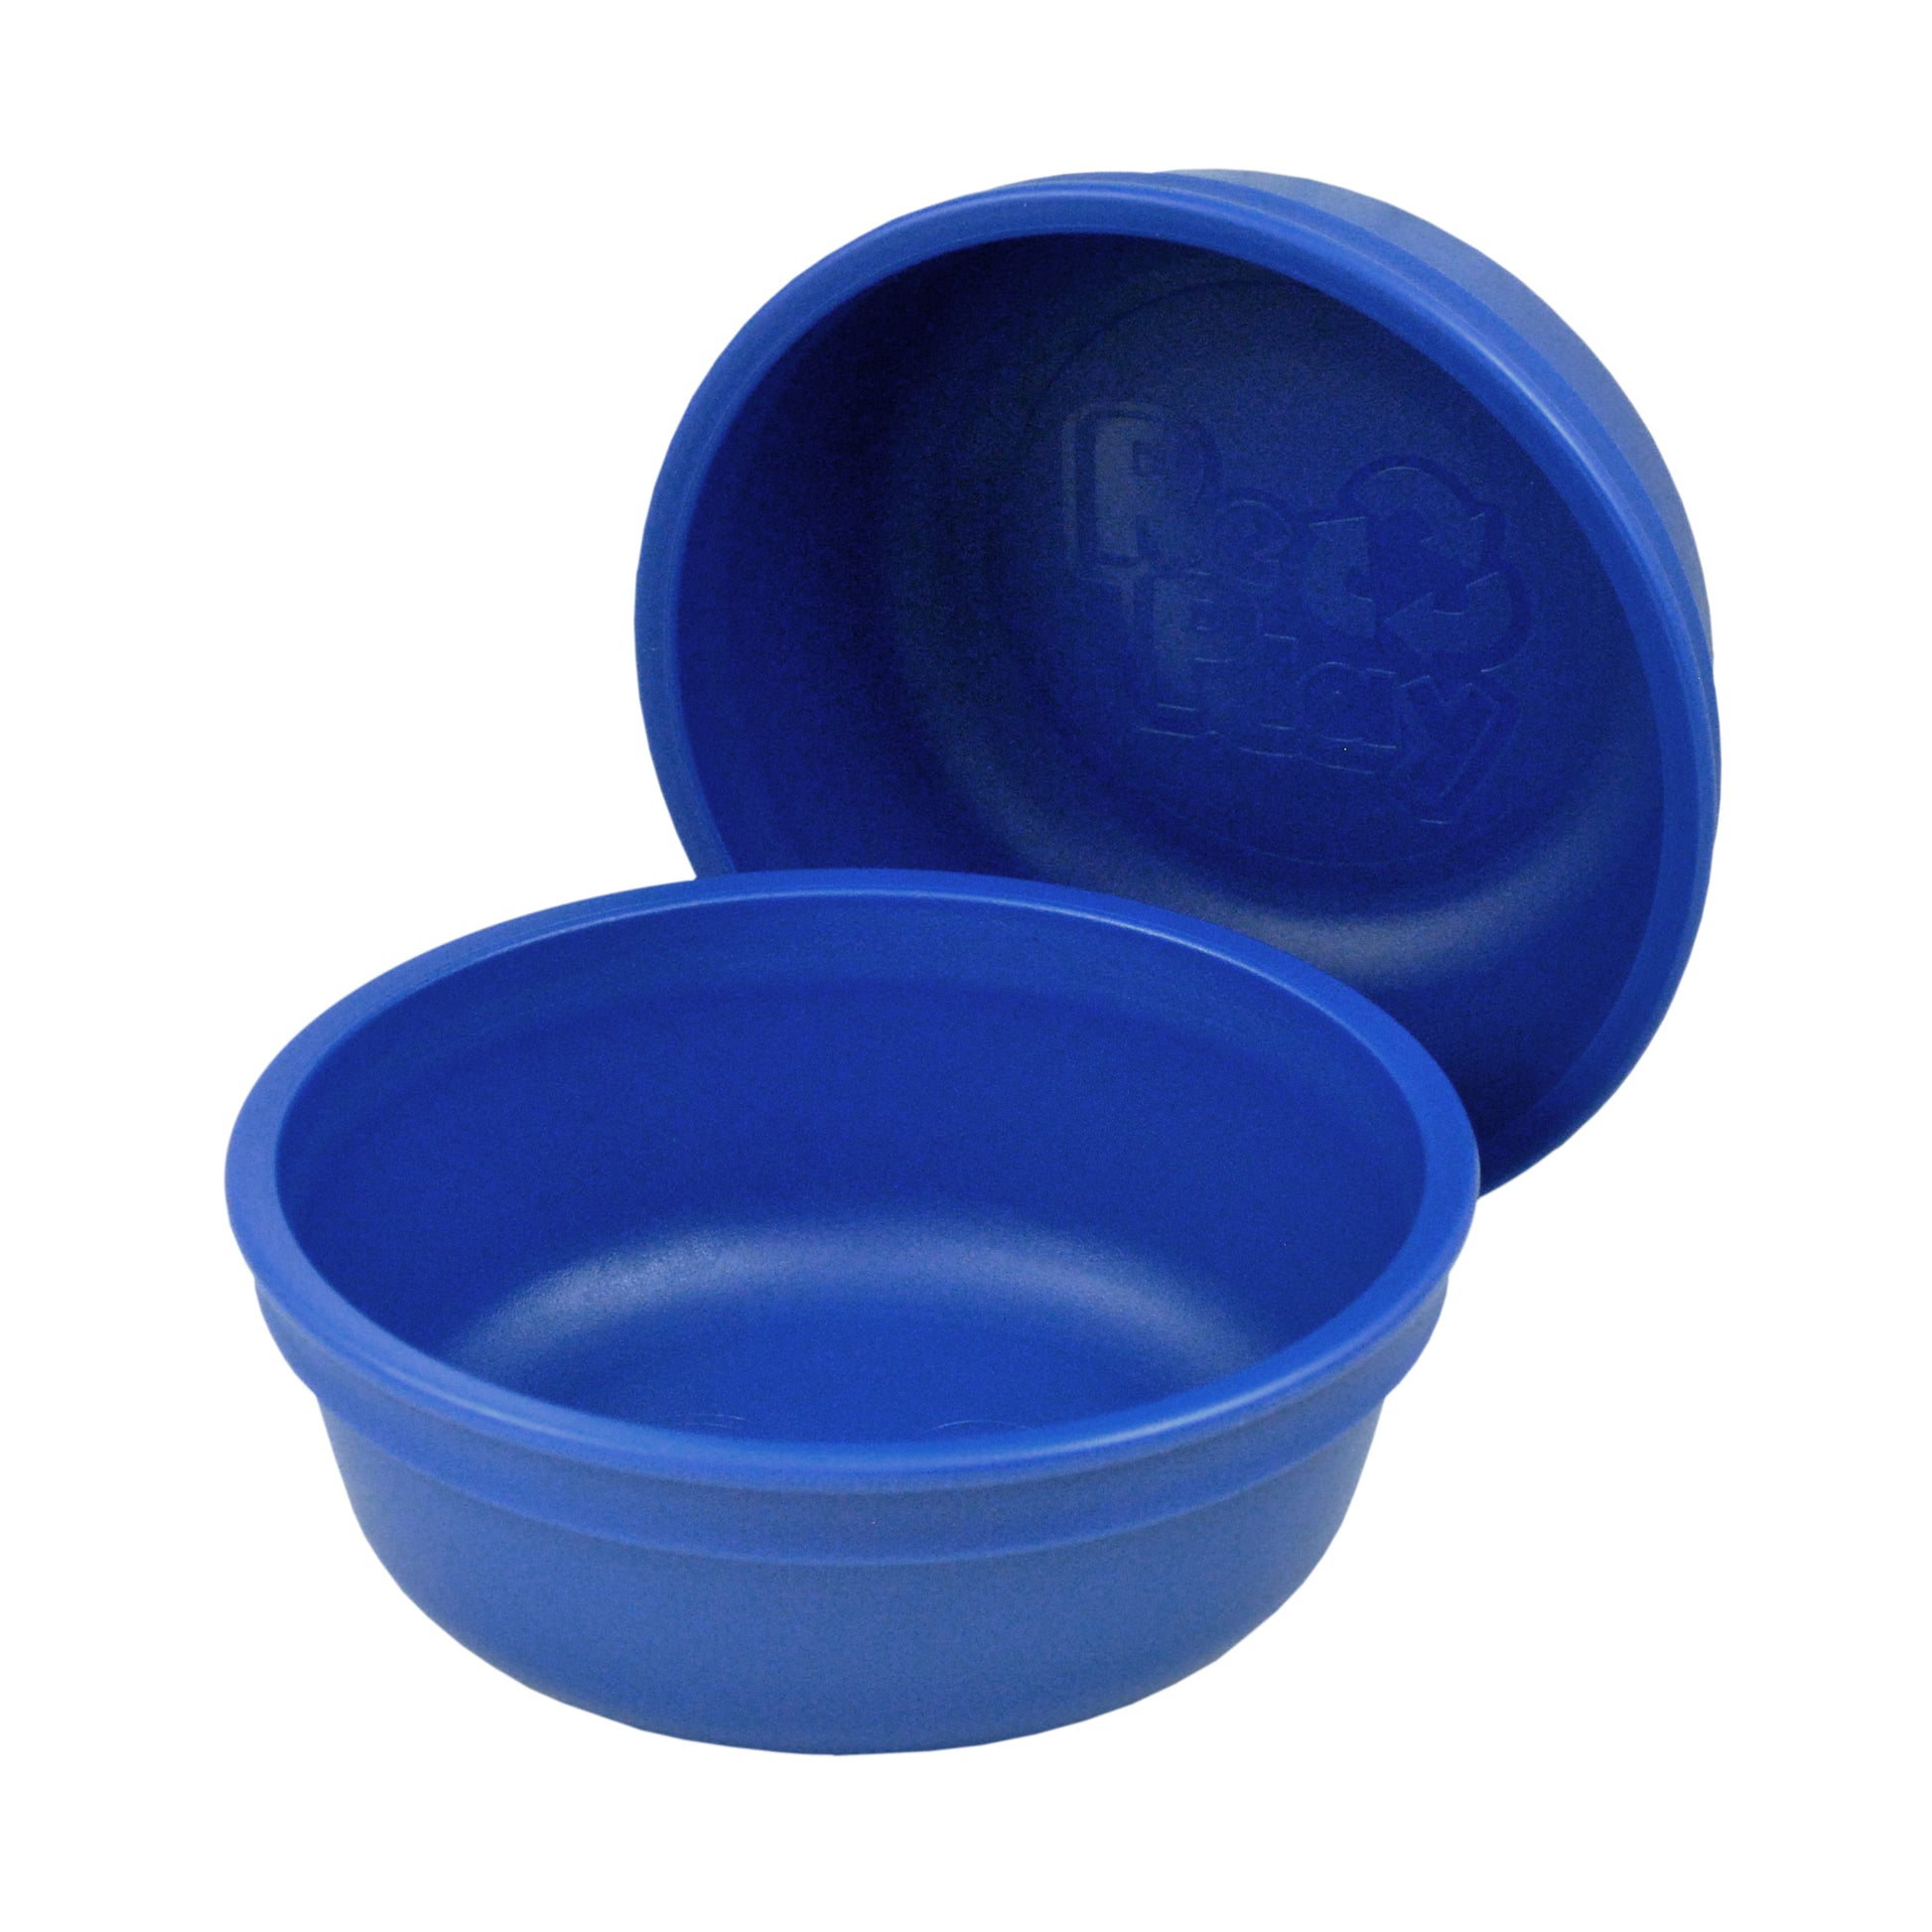 Re-Play Bowl | Standard Size in Navy Blue from Bear & Moo